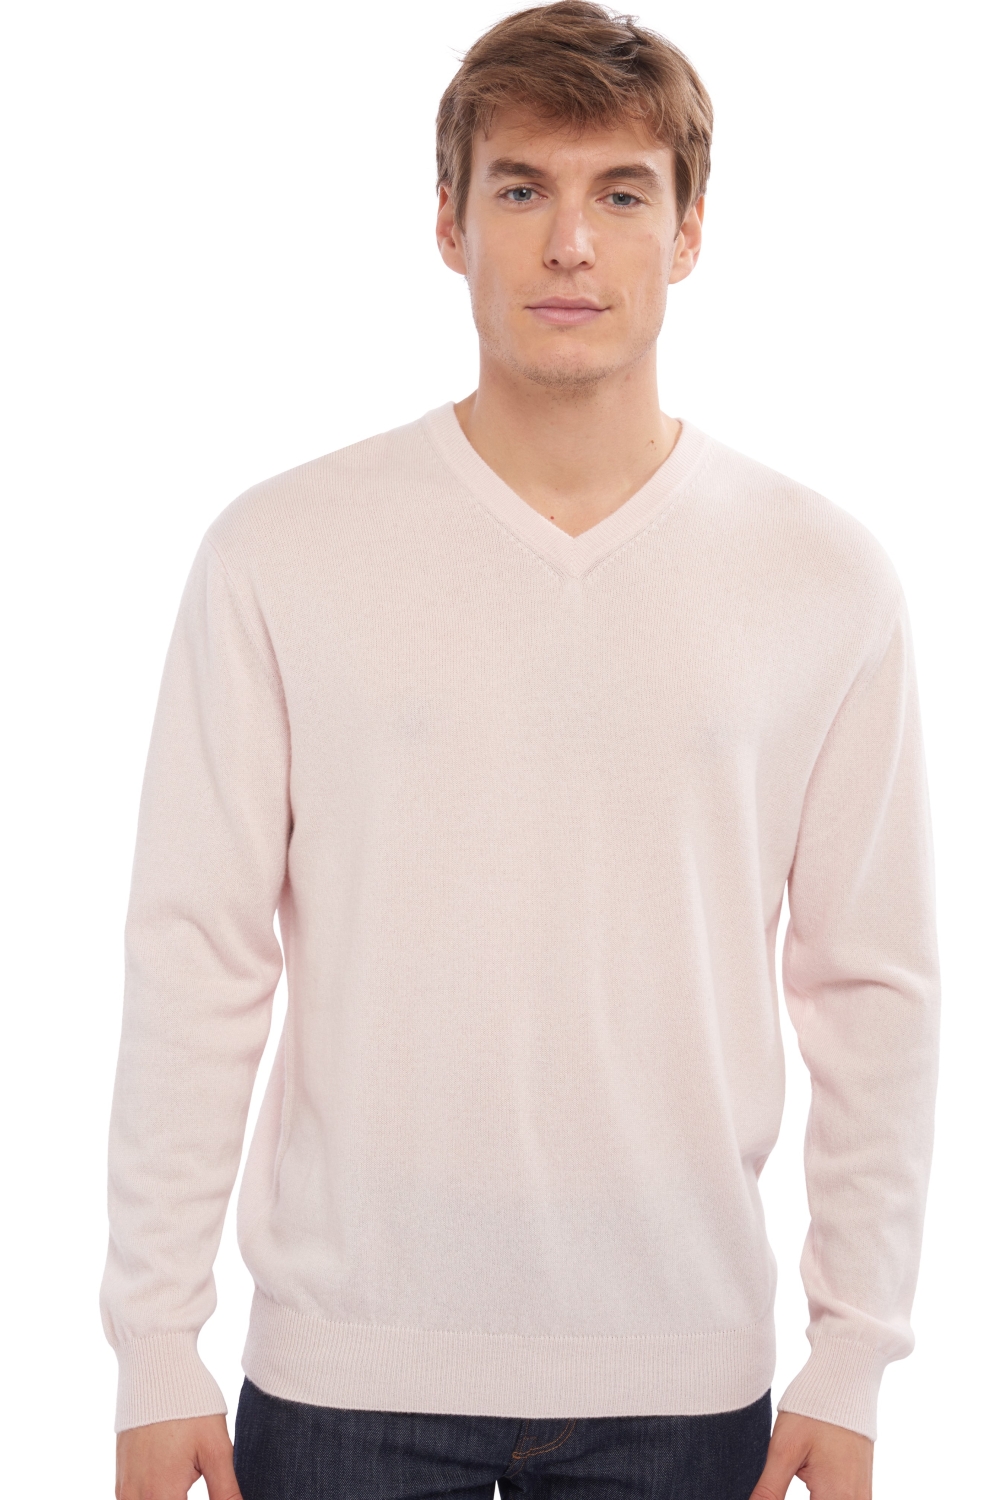 Cachemire pull homme col v gaspard rose pale 3xl